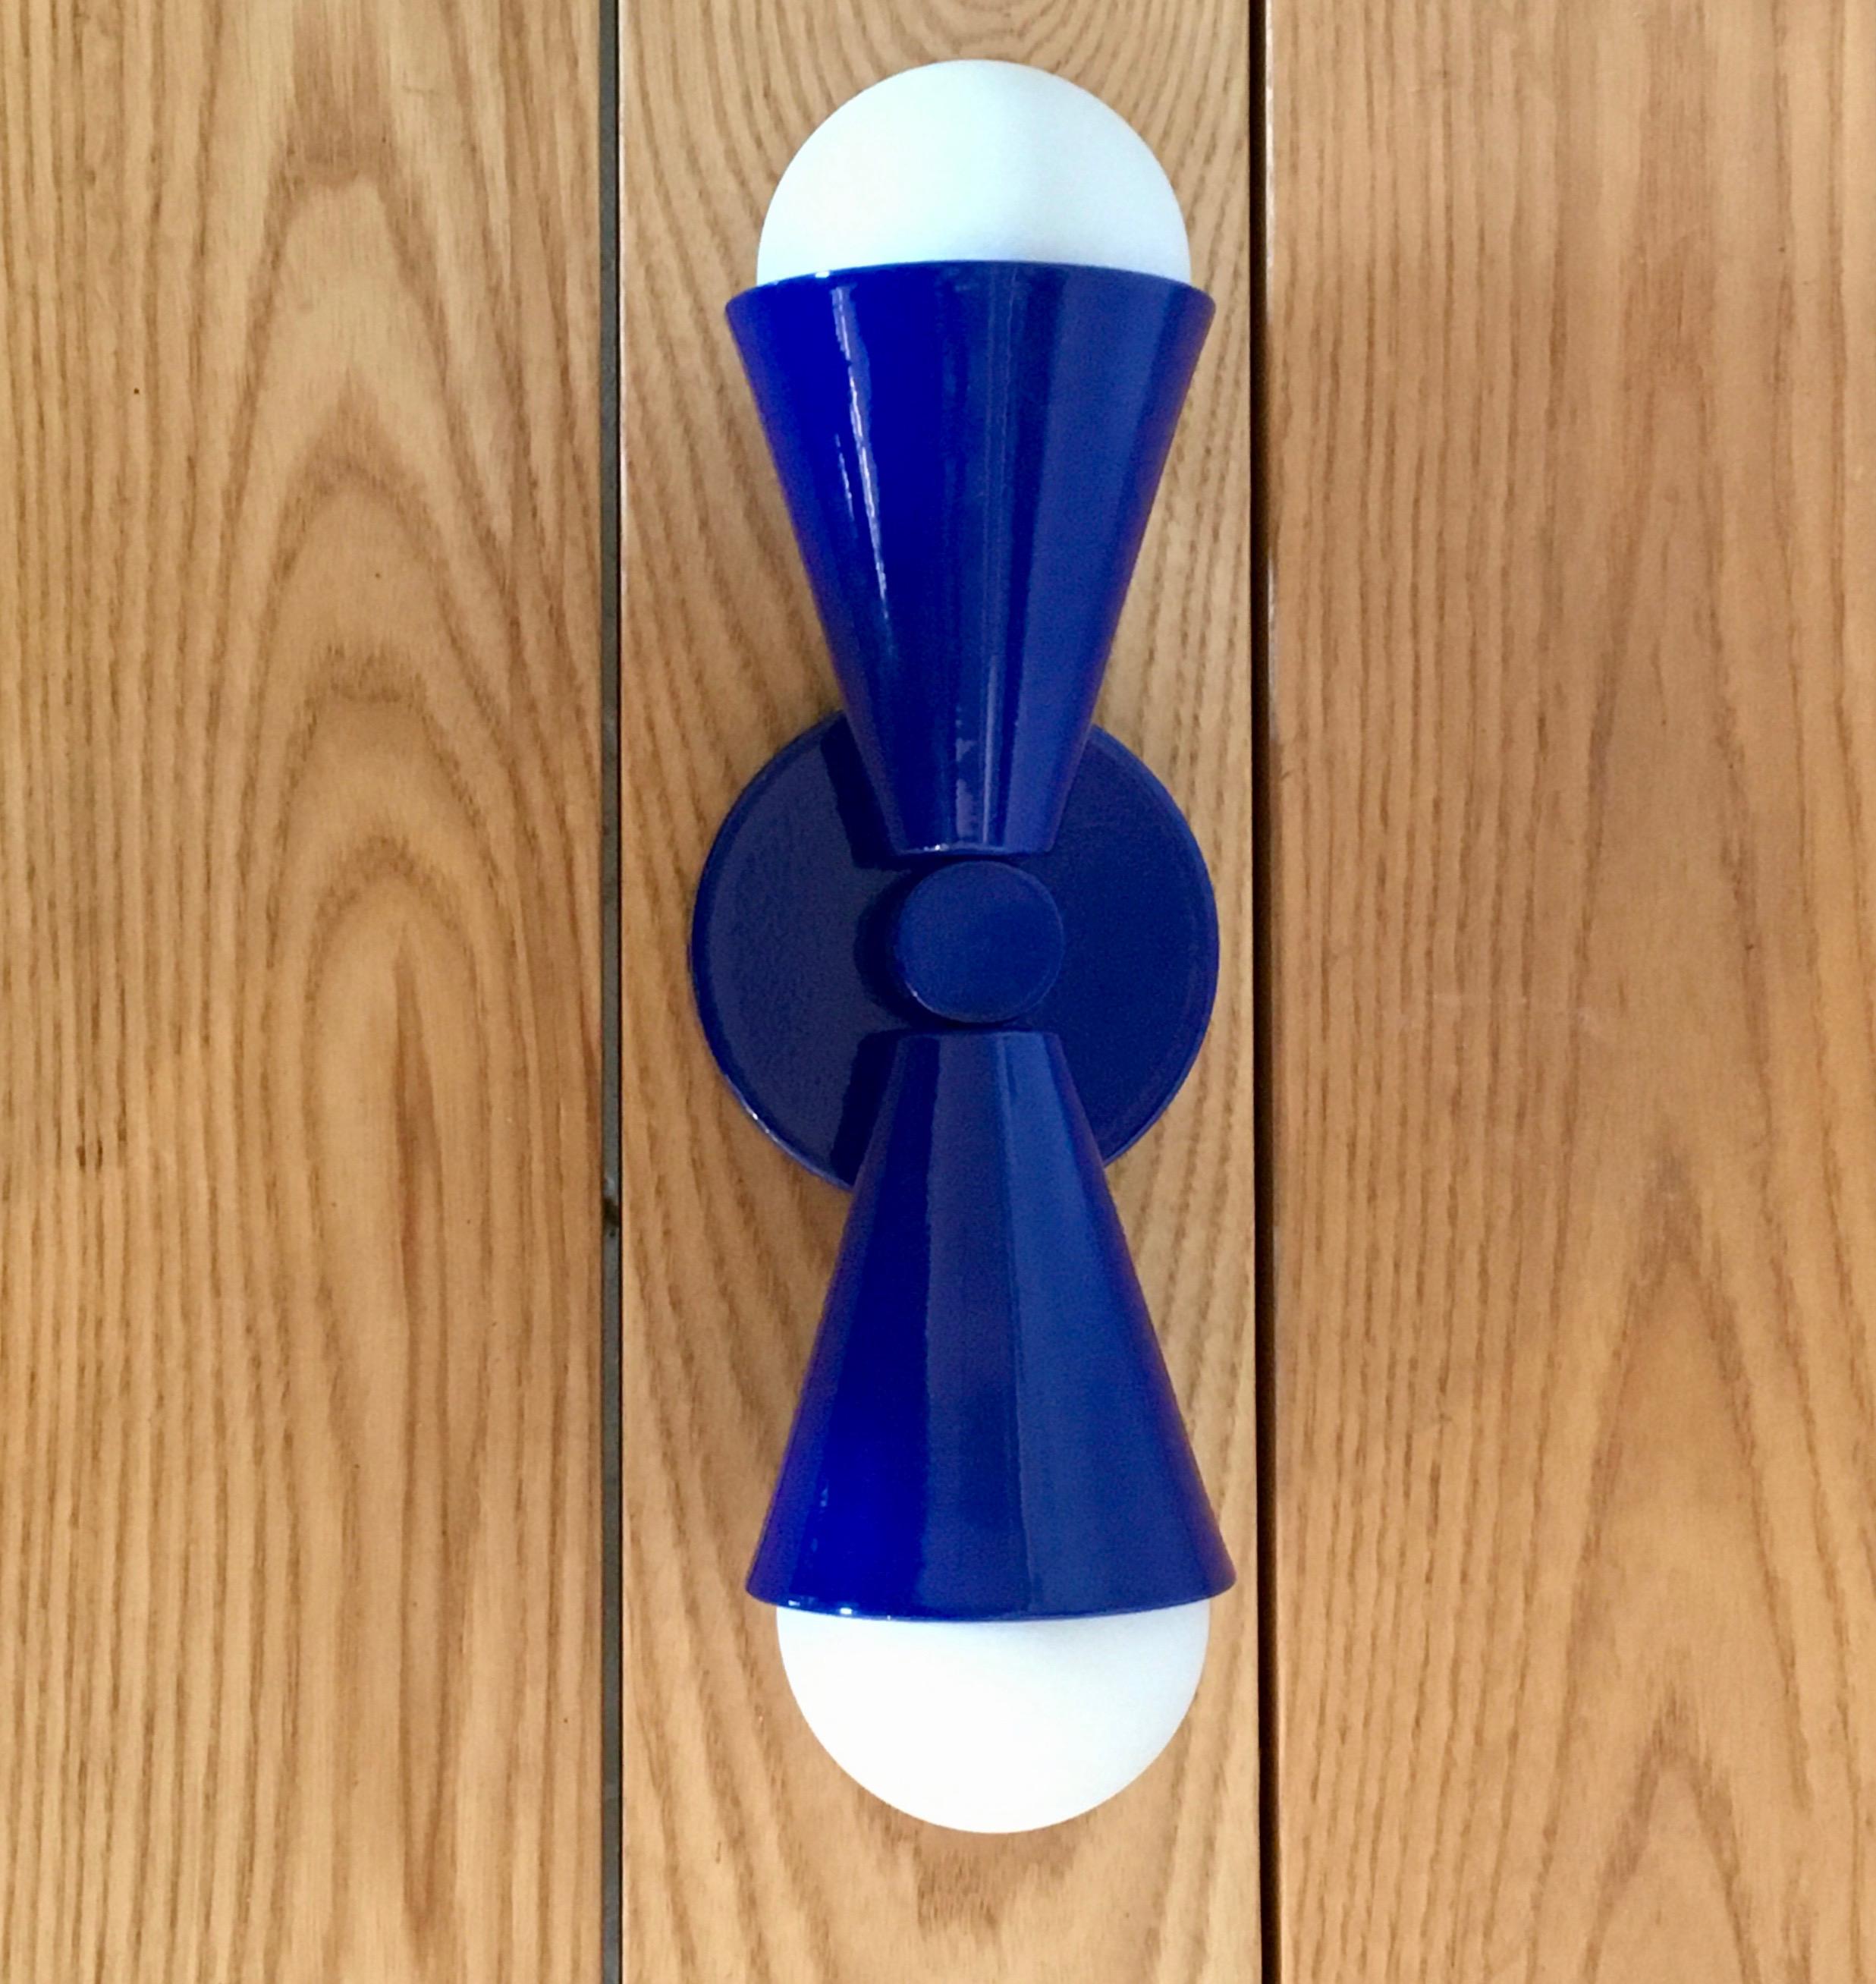 Geometric shapes and playful symmetry add up to our Hourglass sconce. Offered in three rich brass finishes or powder coated colors, this fixture is fitted with 2 E26 sockets, suitable for use with a wide variety of LED replacement bulbs. Main image